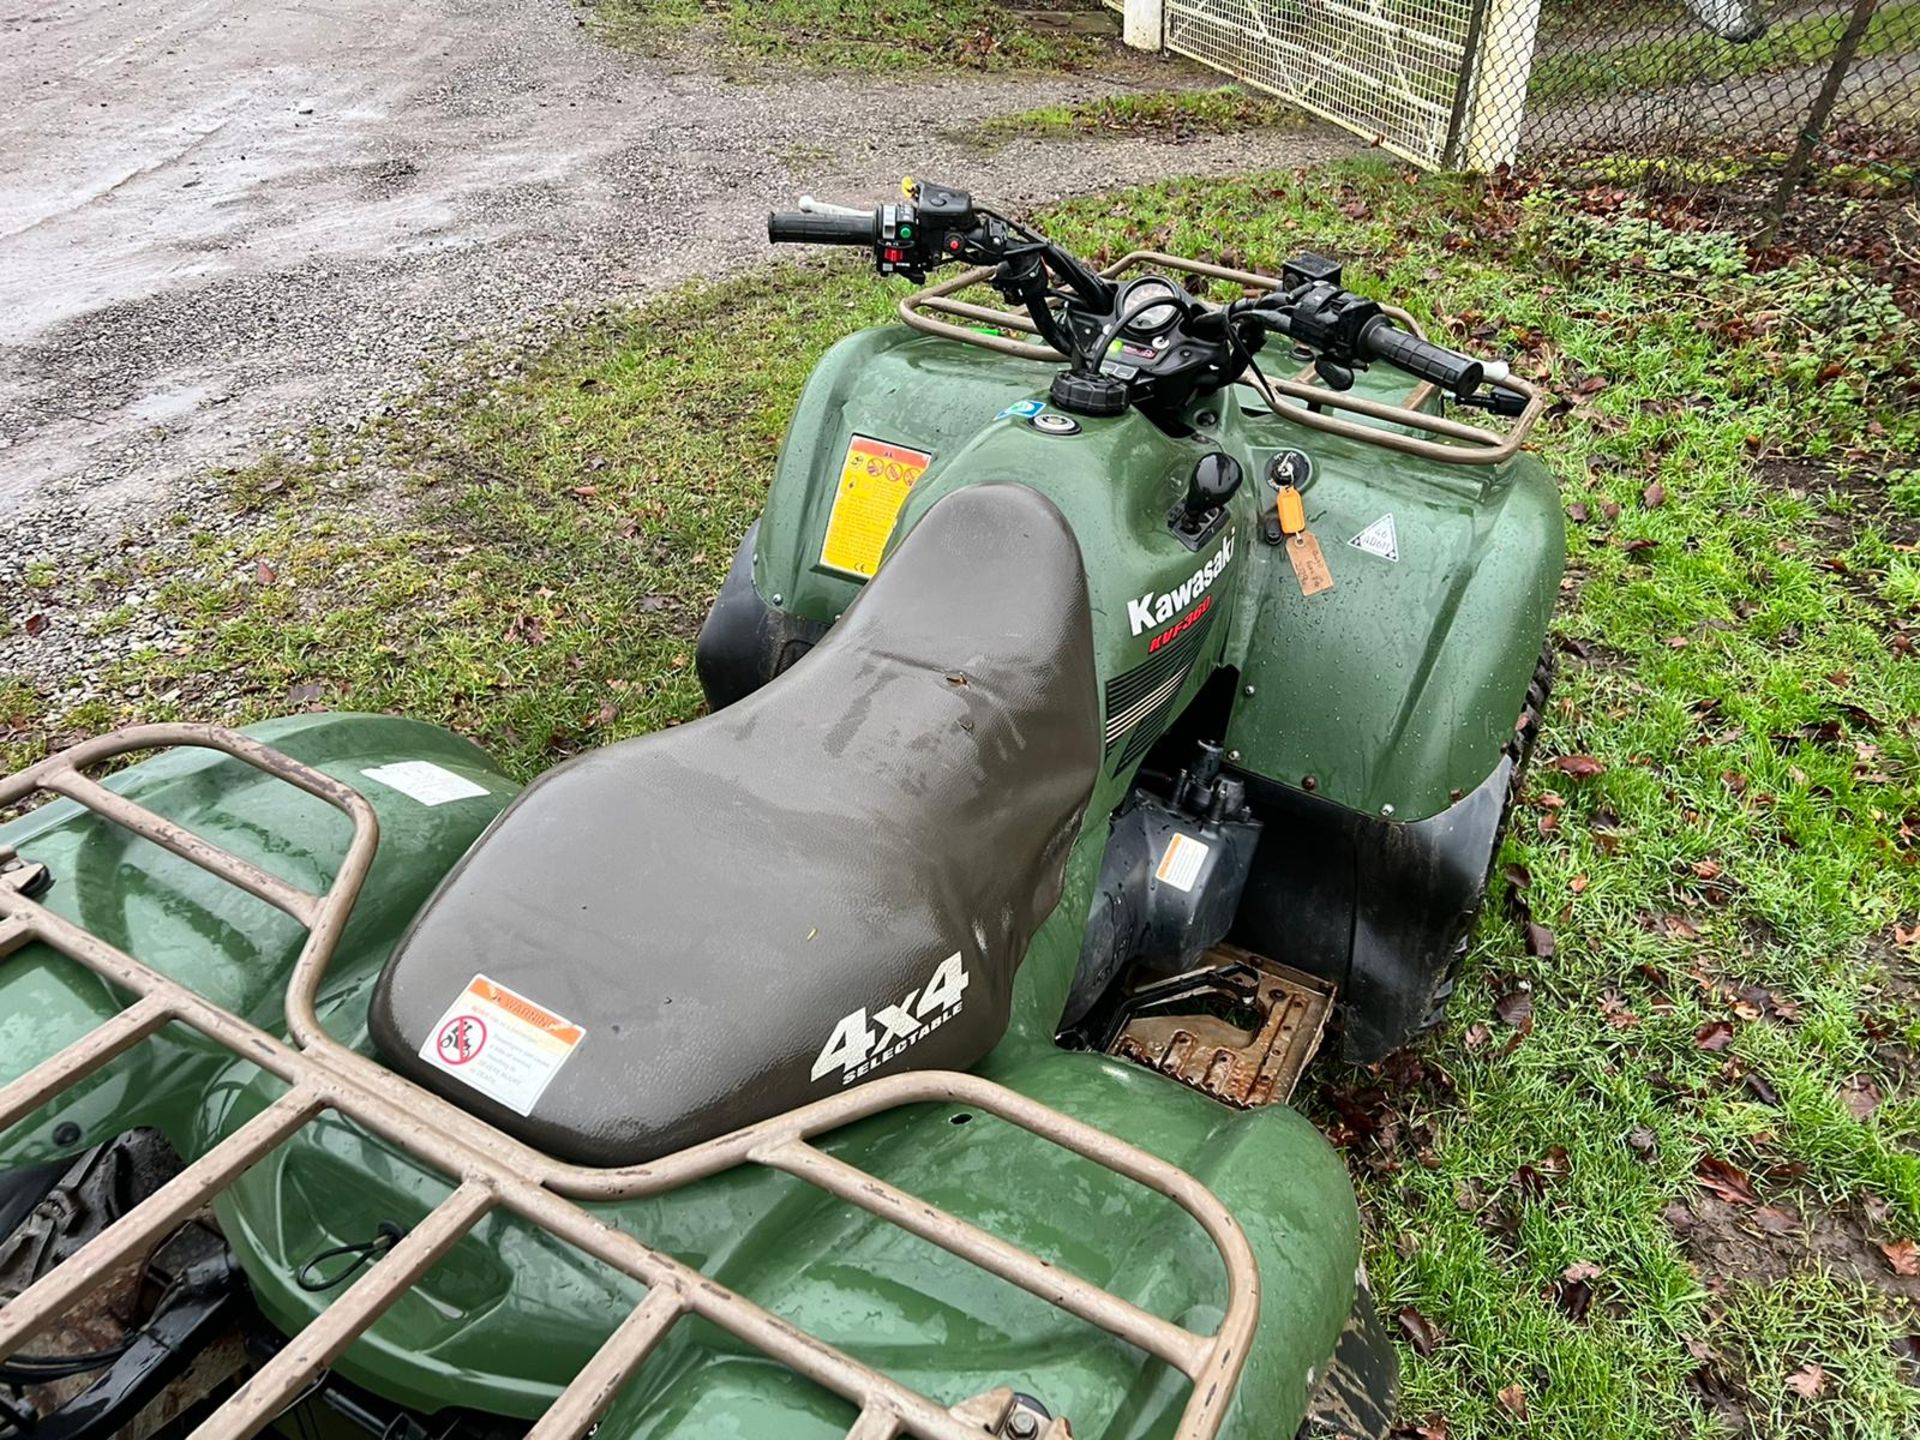 KAWASAKI KVF360 4WD FARM QUAD BIKE, RUNS AND DRIVES WELL, SHOWING A LOW 3438 HOURS PLUS VAT* - Image 9 of 13